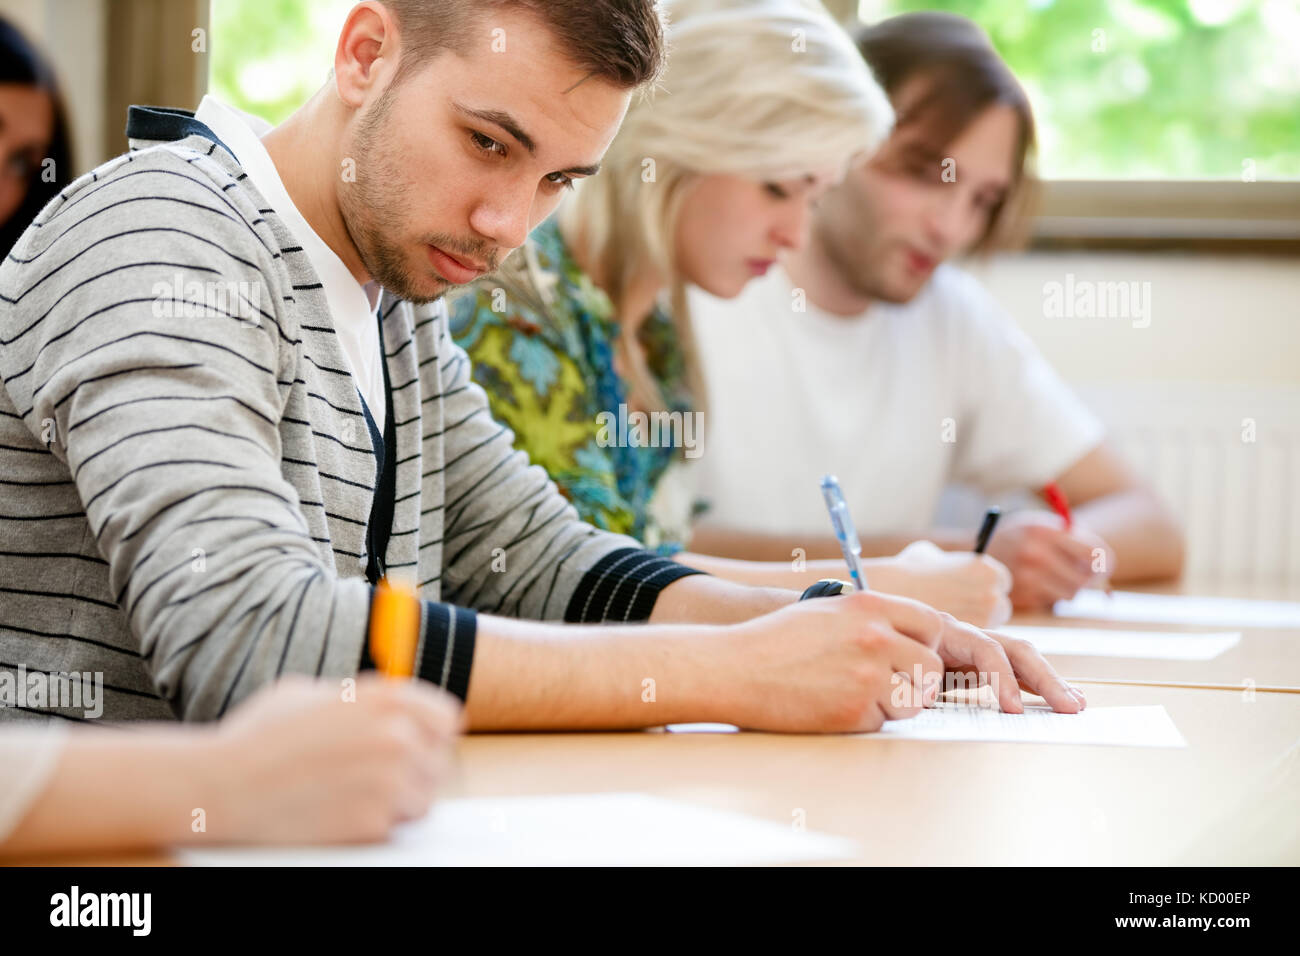 college student trying to copy off a student's test paper. Stock Photo